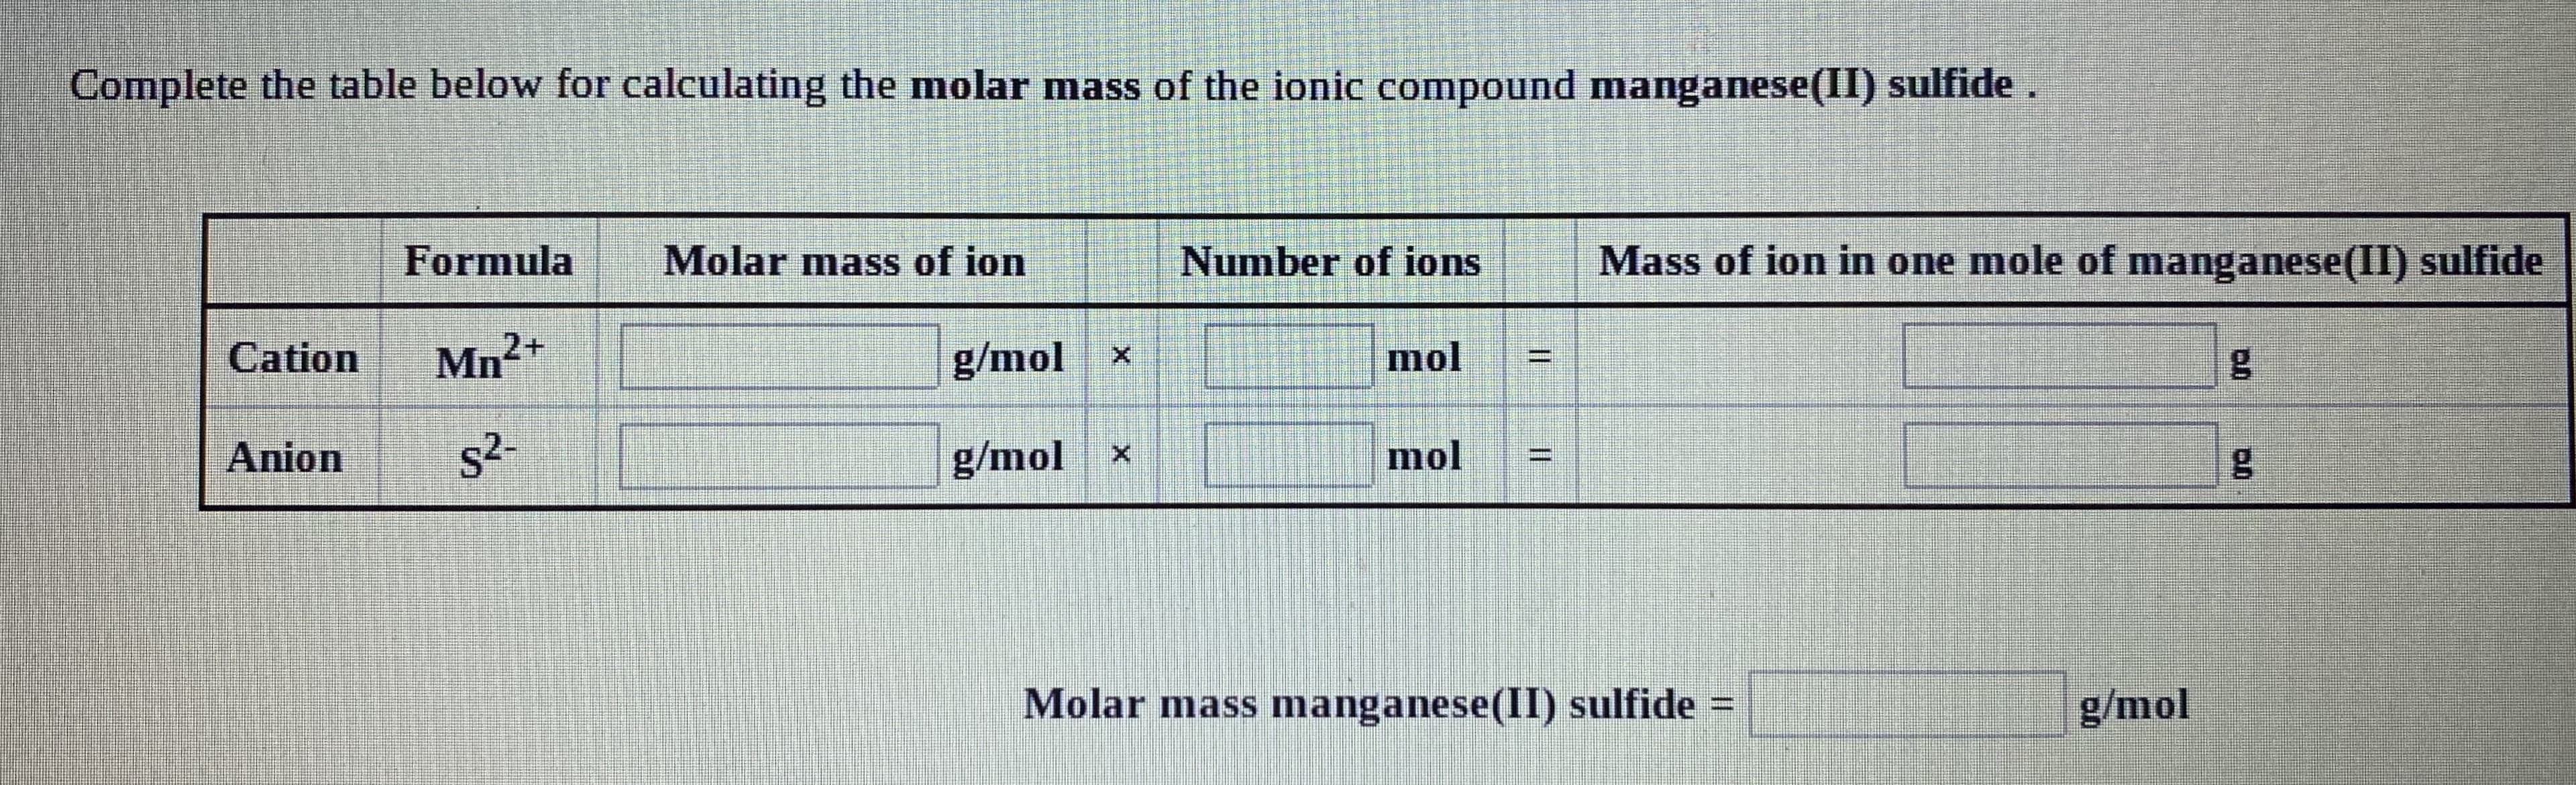 Complete the table below for calculating the molar mass of the ionic compound manganese(II) sulfide.
Formula
Molar mass of ion
Number of ions
Mass of ion in one mole of manganese(II) sulfide
Cation
Mn²+
g/mol x
mol
%3D
Anion
s2-
g/mol x
mol
%3D
Molar mass manganese(II) sulfide =
g/mol
